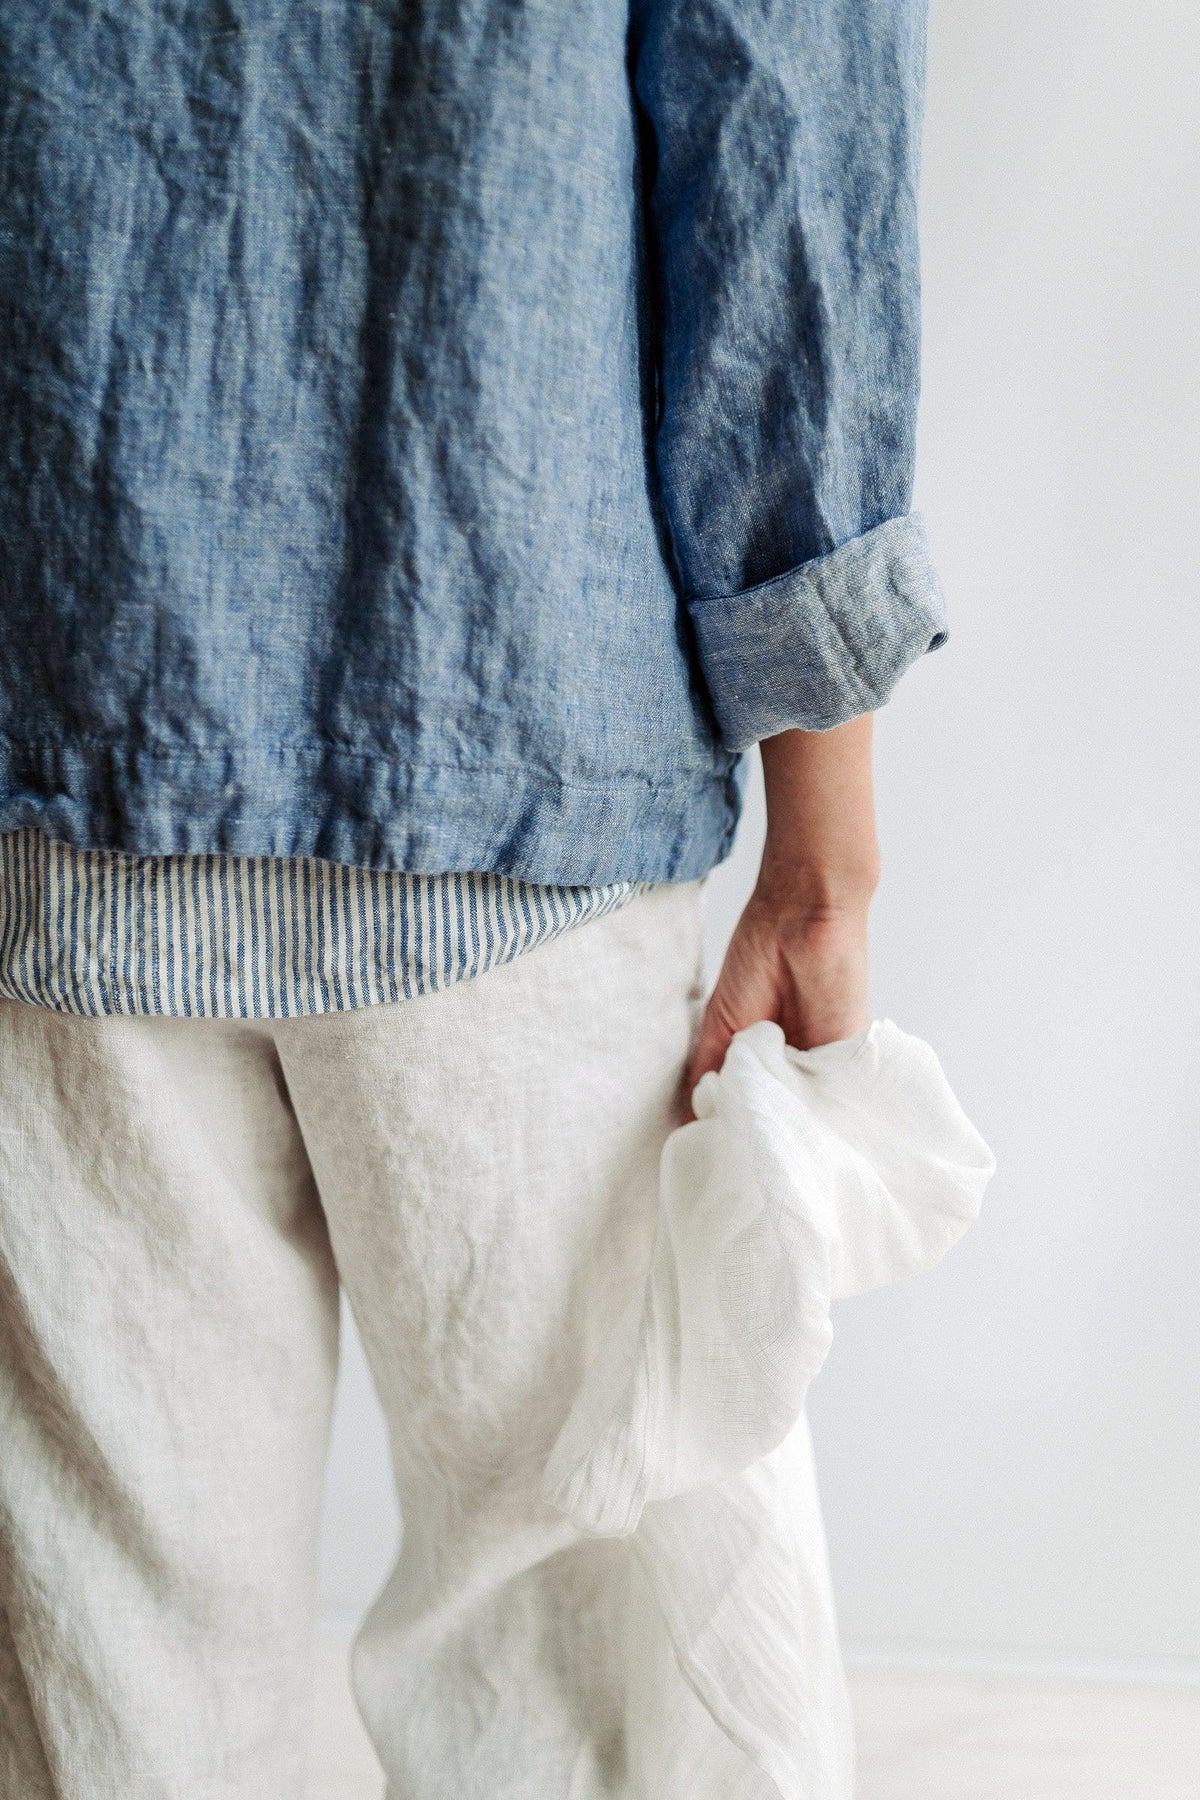 A French Way To Wear White Linen Pants | Linen pants women, Striped linen  pants, Blue linen pants outfit